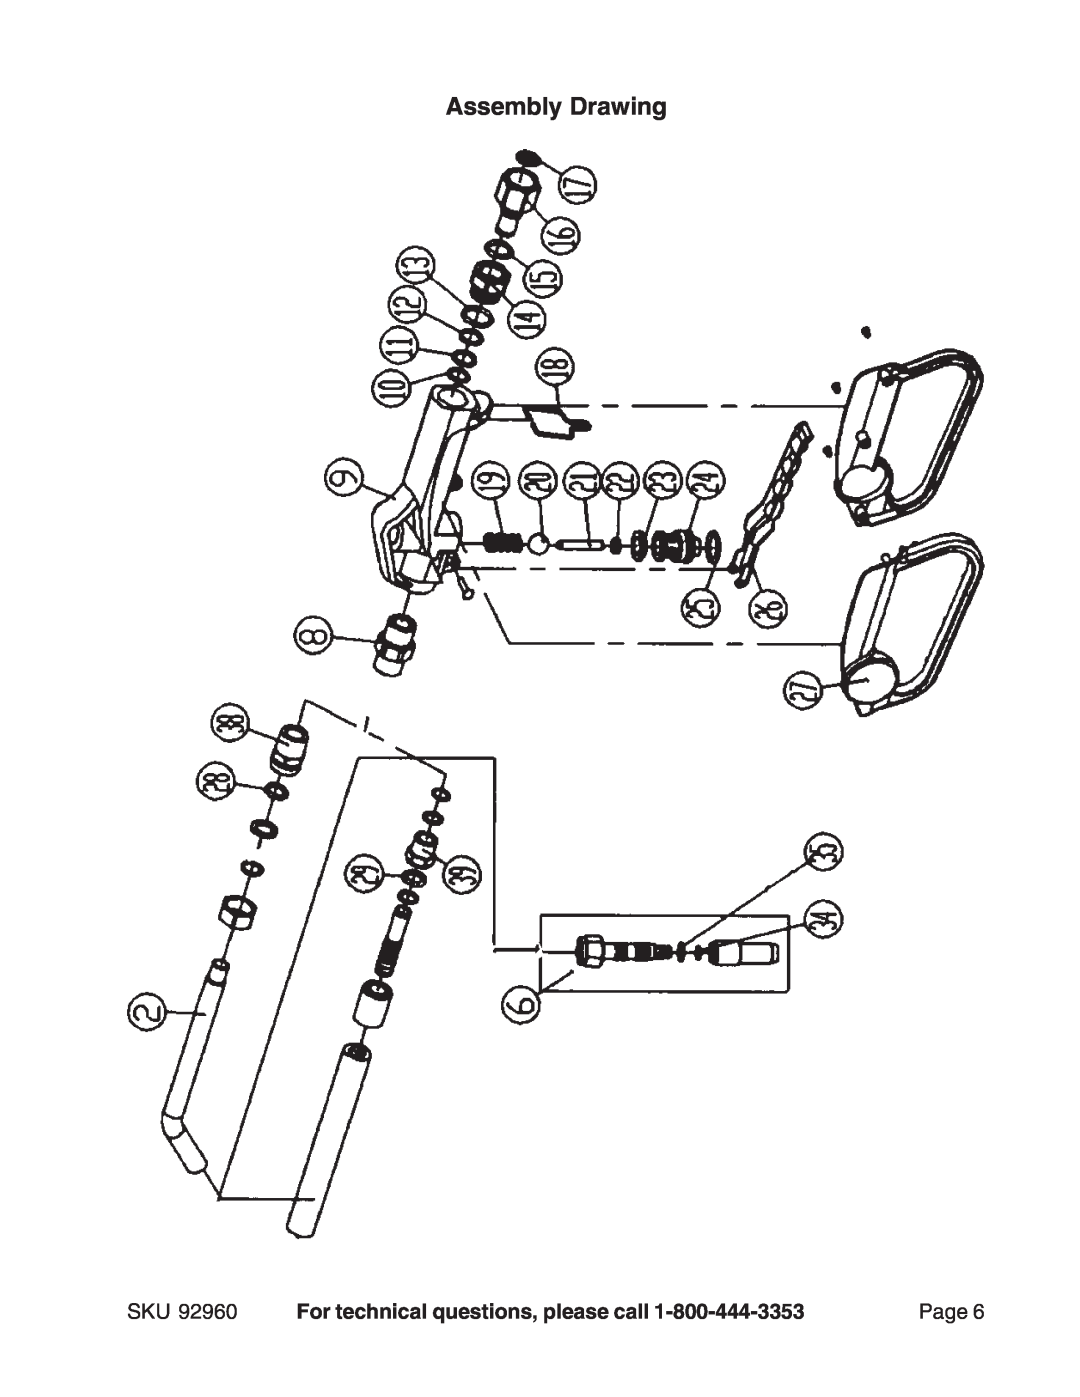 Harbor Freight Tools 92960 manual Assembly Drawing, For technical questions, please call, Page 